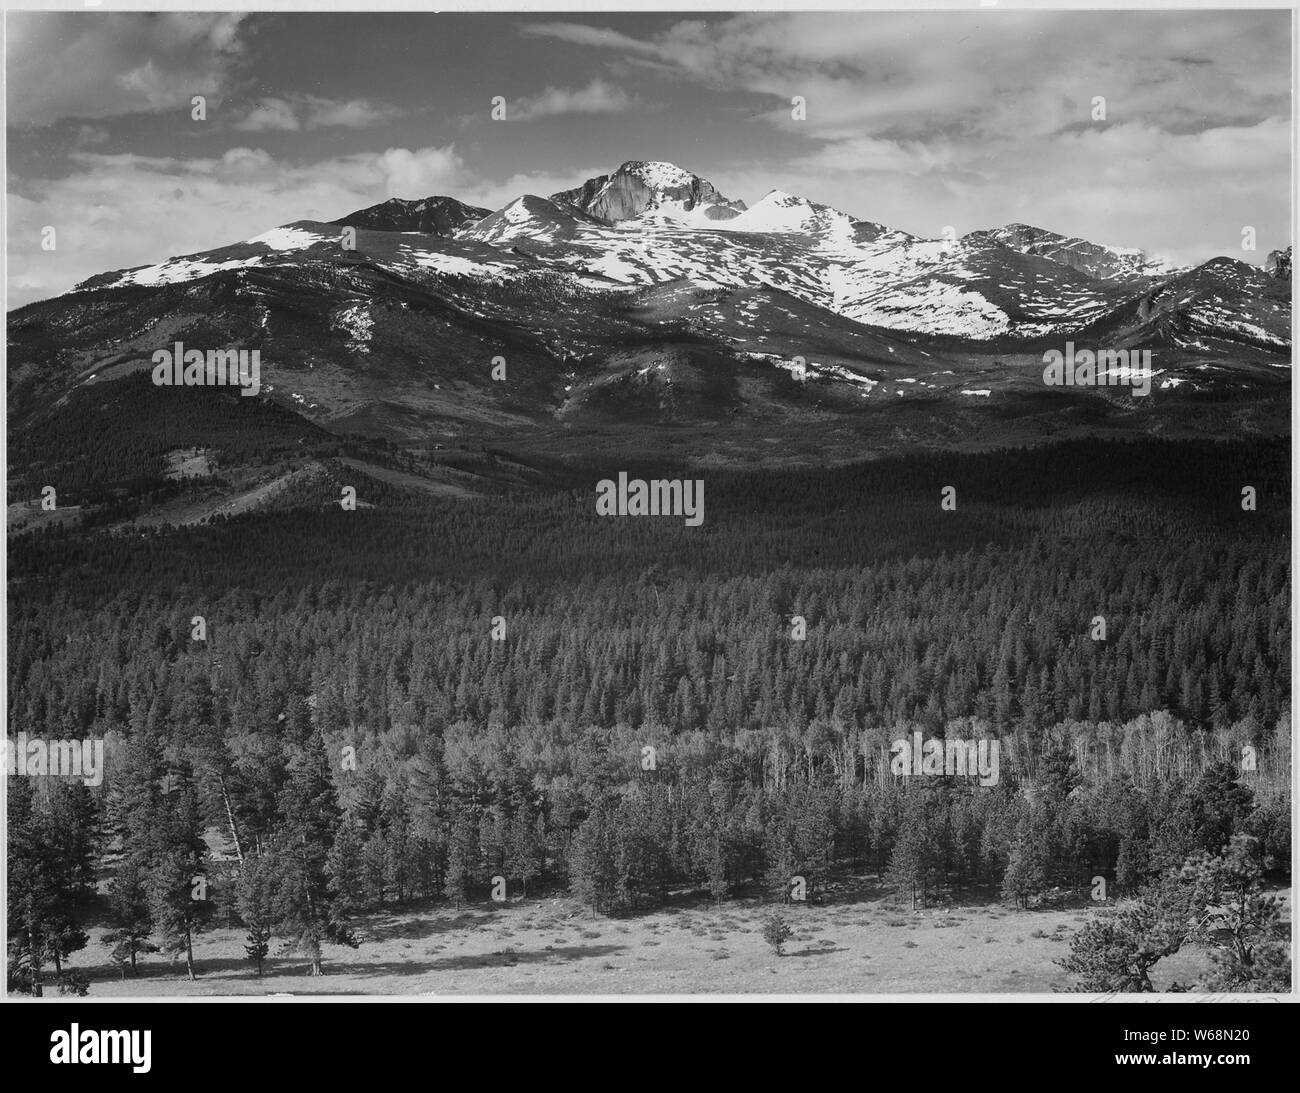 Trees in foreground, snow covered mountain in background, Long's Peak from North, Rocky Mountain National Park, Colorado., 1933 - 1942 Stock Photo